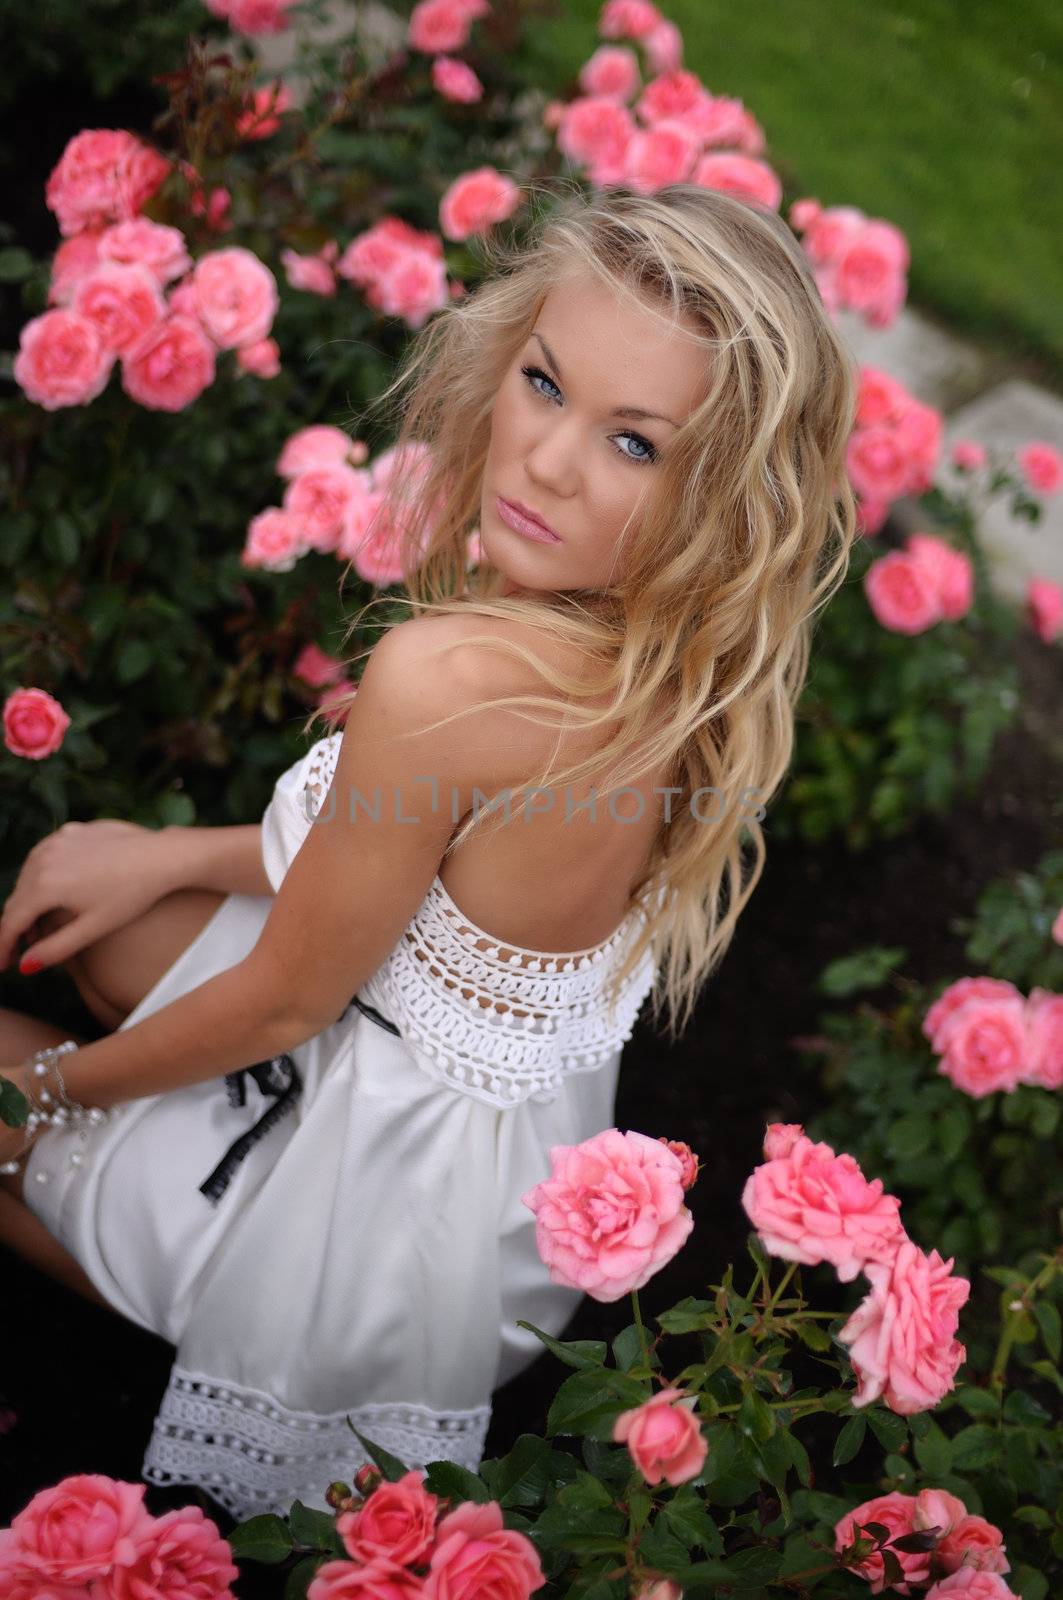 Overhead portrait of a beautiful blonde woman sitting in a bed of pink roses and looking up at the camera.